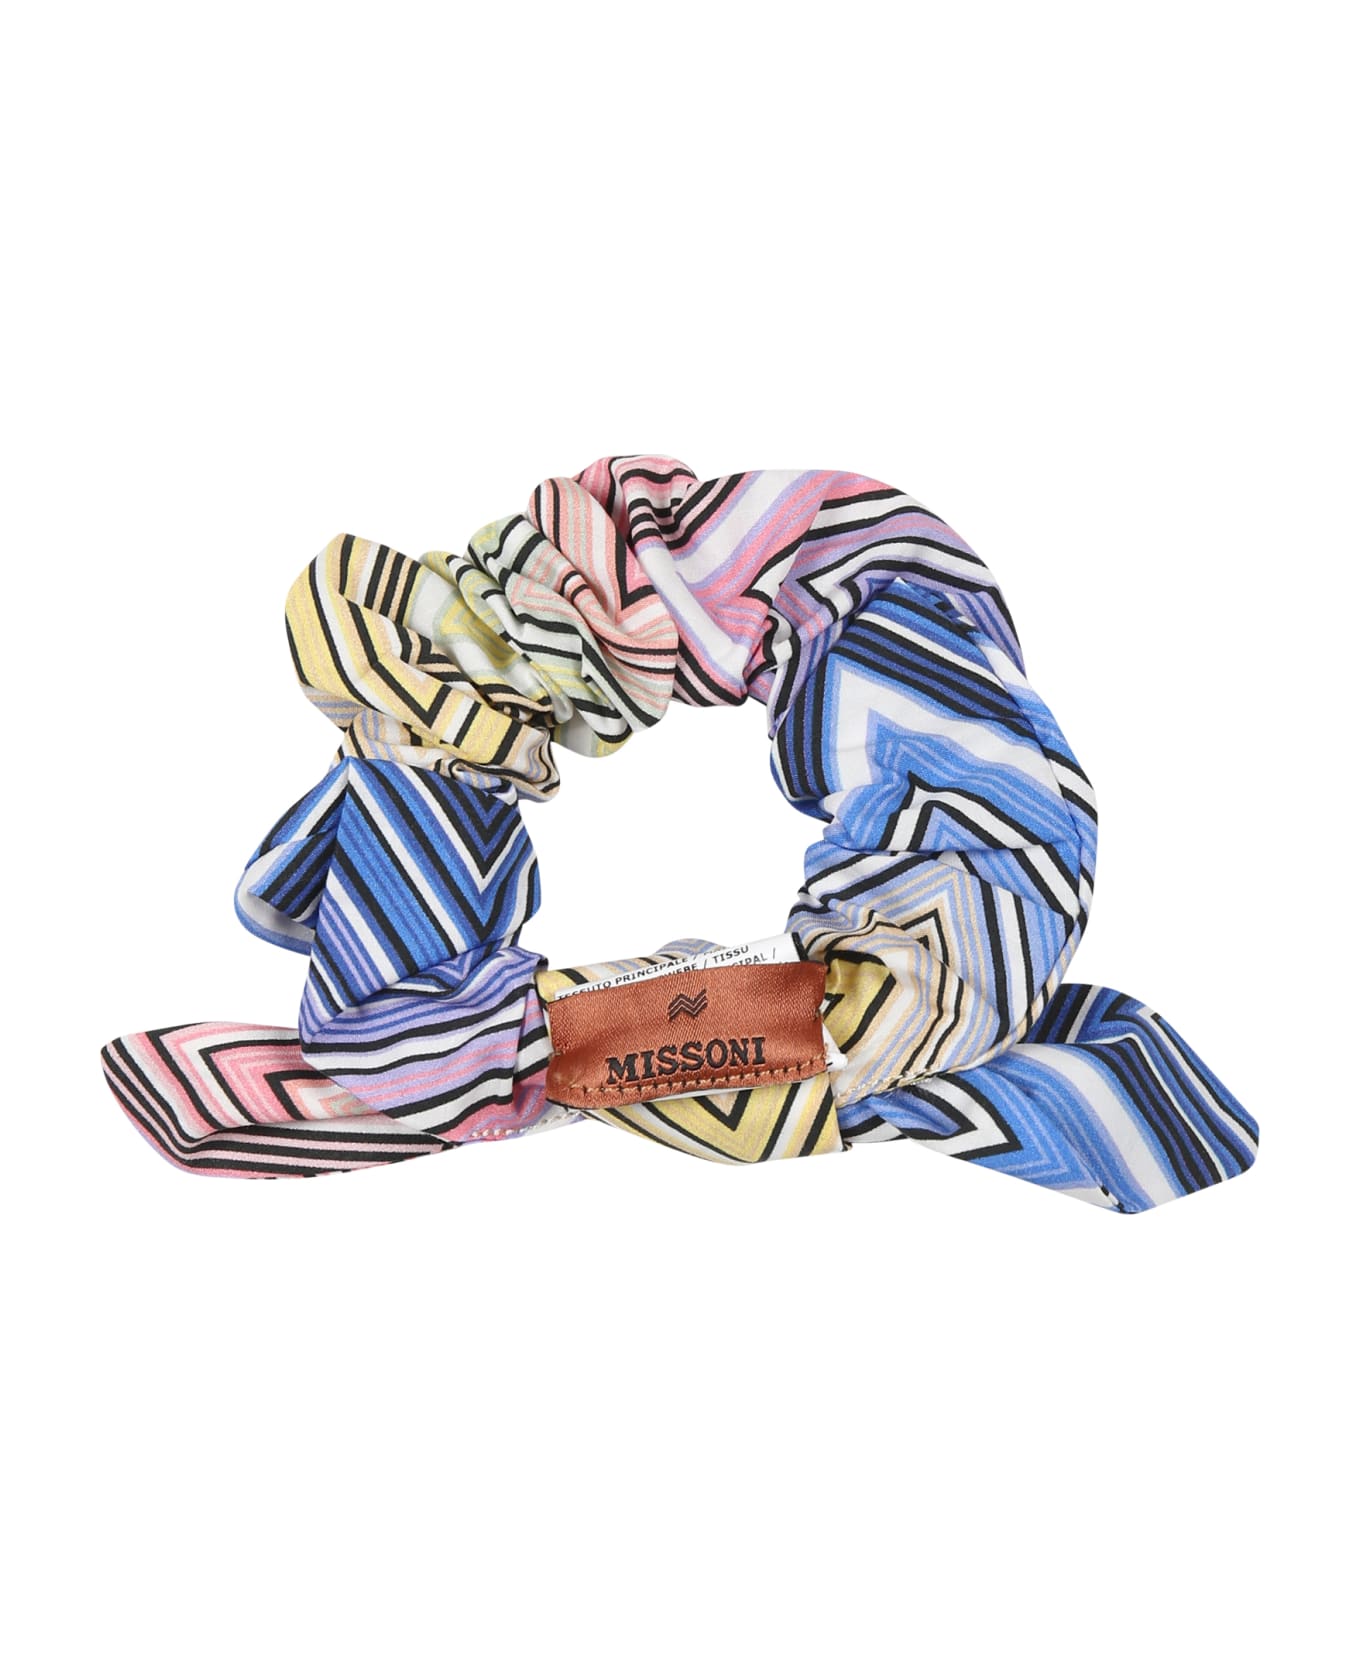 Missoni Multicolor Scrunchie For Girl With Chevron Pattern - Multicolor アクセサリー＆ギフト